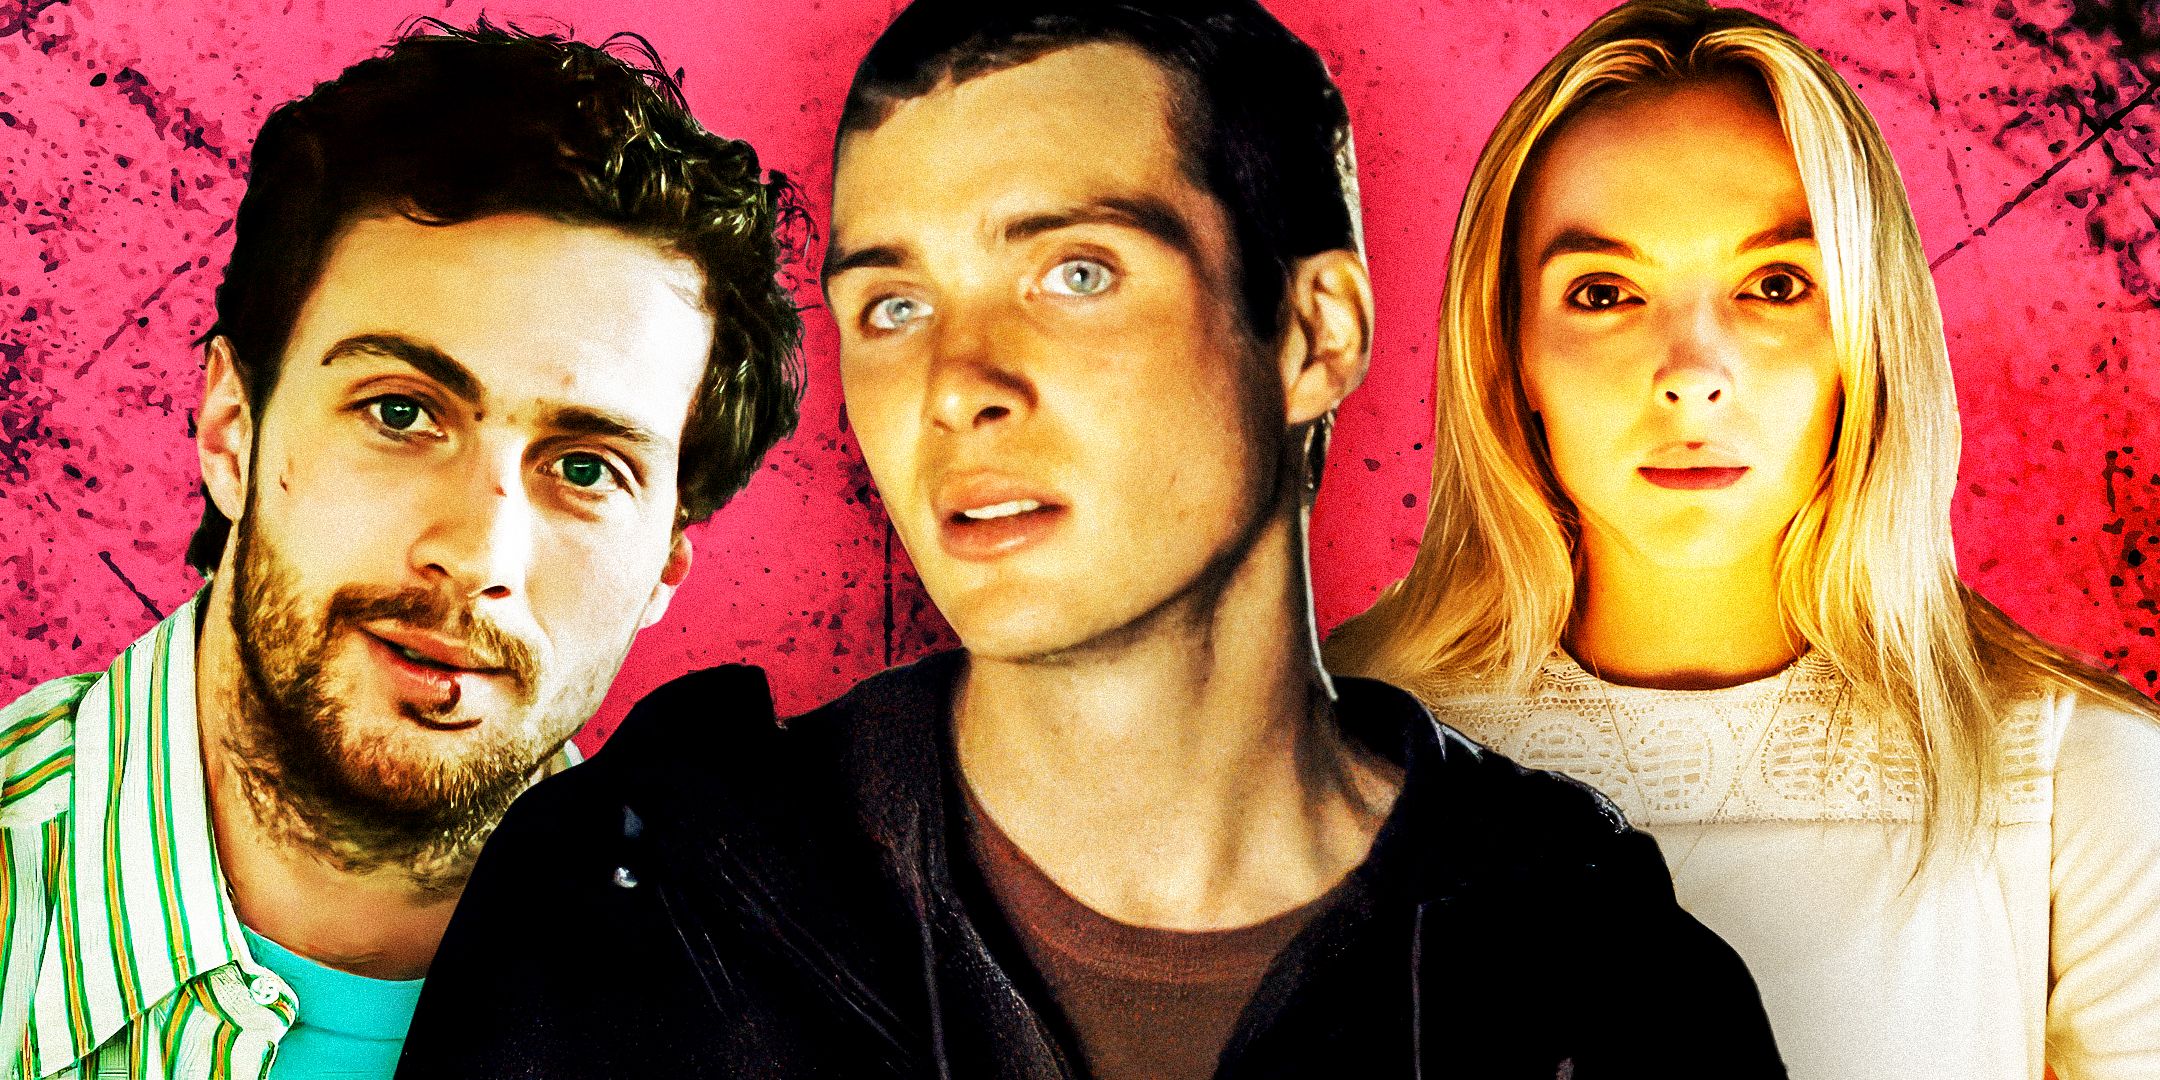 Aaron Taylor-Johnson as James Frey from A Million Little Pieces Jodie Comer as Villanelle and Cillian Murphy as Jim from 28 Days Later